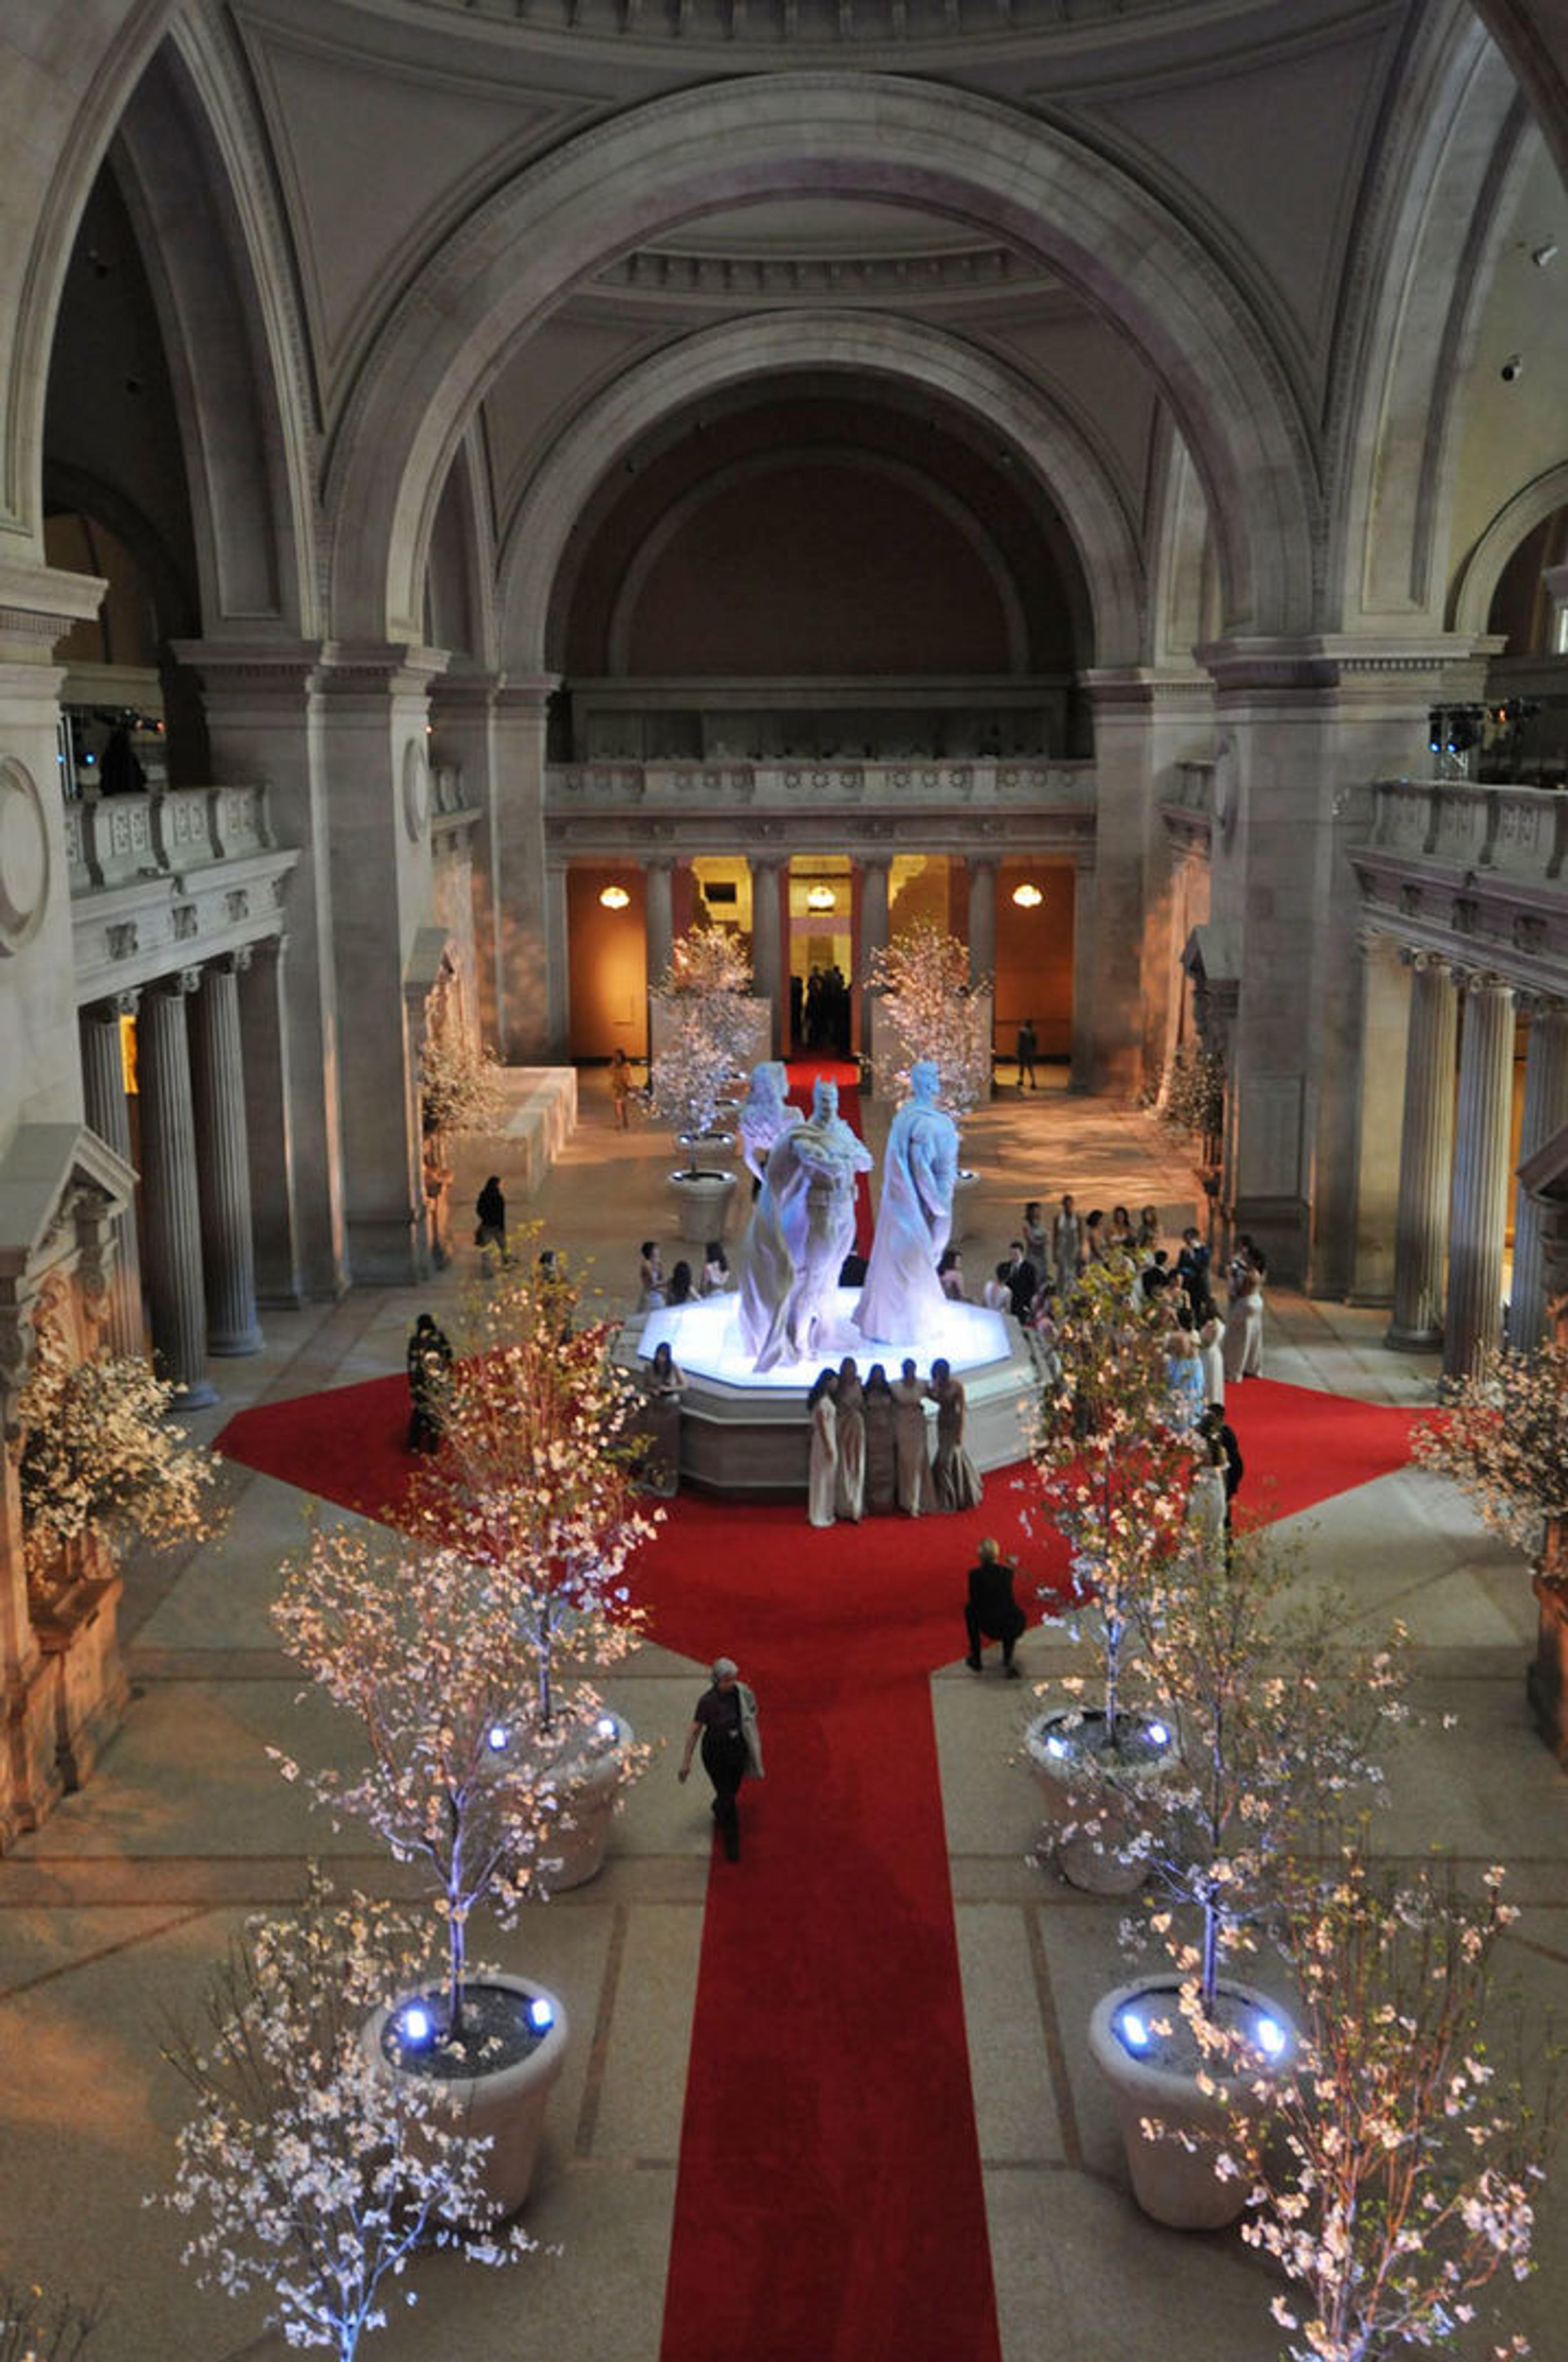 A view of The Met's Great Hall during the 2008 Met Gala, featuring large superhero sculptures atop an information desk and many elegantly lit trees